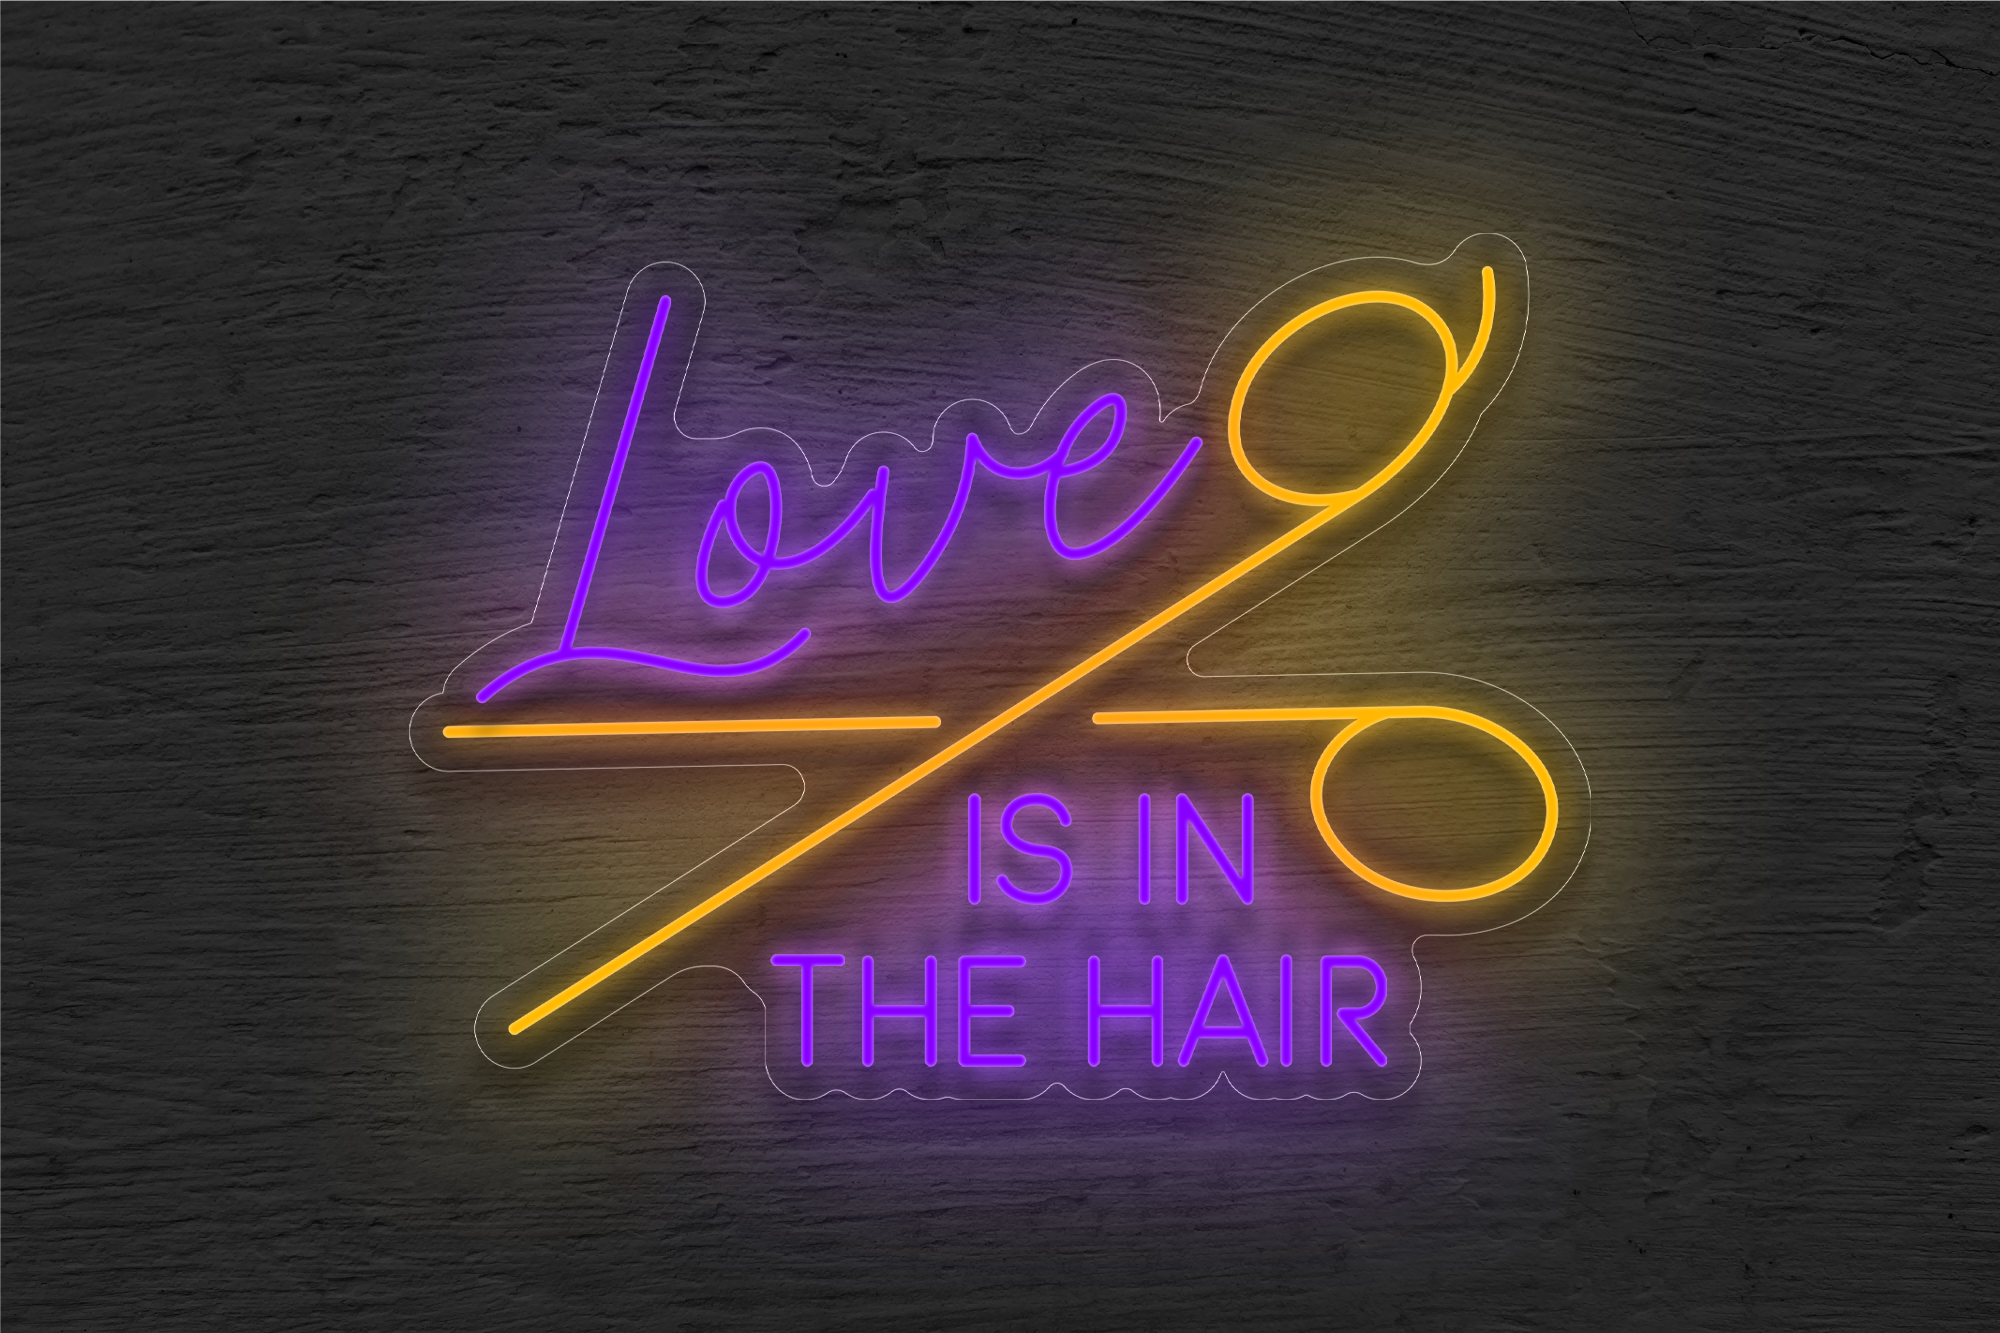 "Love is in the Air" with Scissor LED Neon Sign